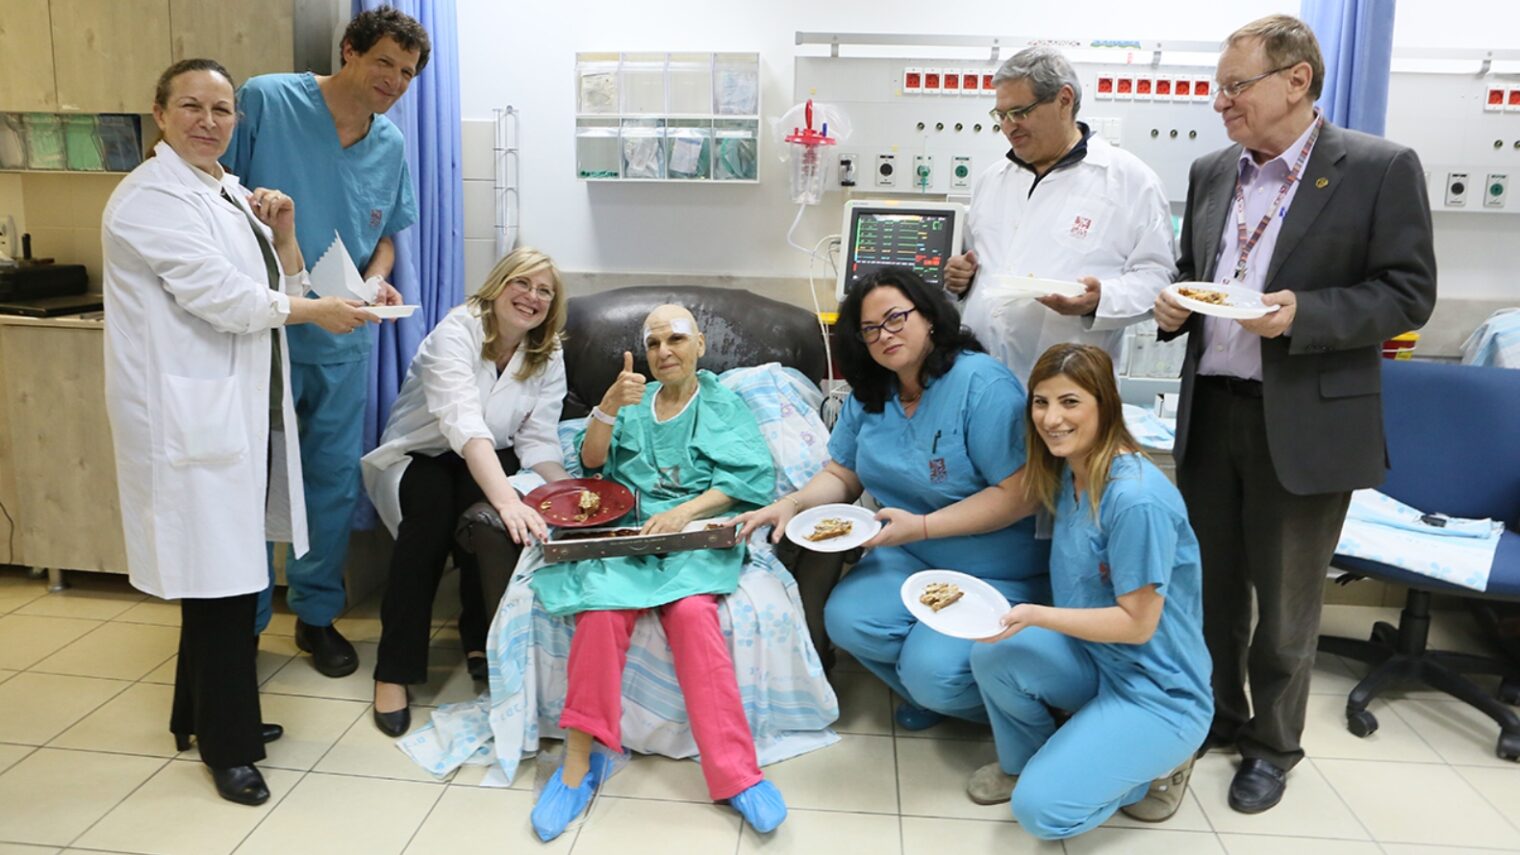 Celebrating with the patient immediately afterward her treatment with Exablate Neuro are Rambam Medical Center physicians Menashe Zaaroor, Alon Sinai, Ilana Schlesinger and Dorith Goldsher along with other support staff. Photo by Pioter Fliter/Rambam Health Care Campus